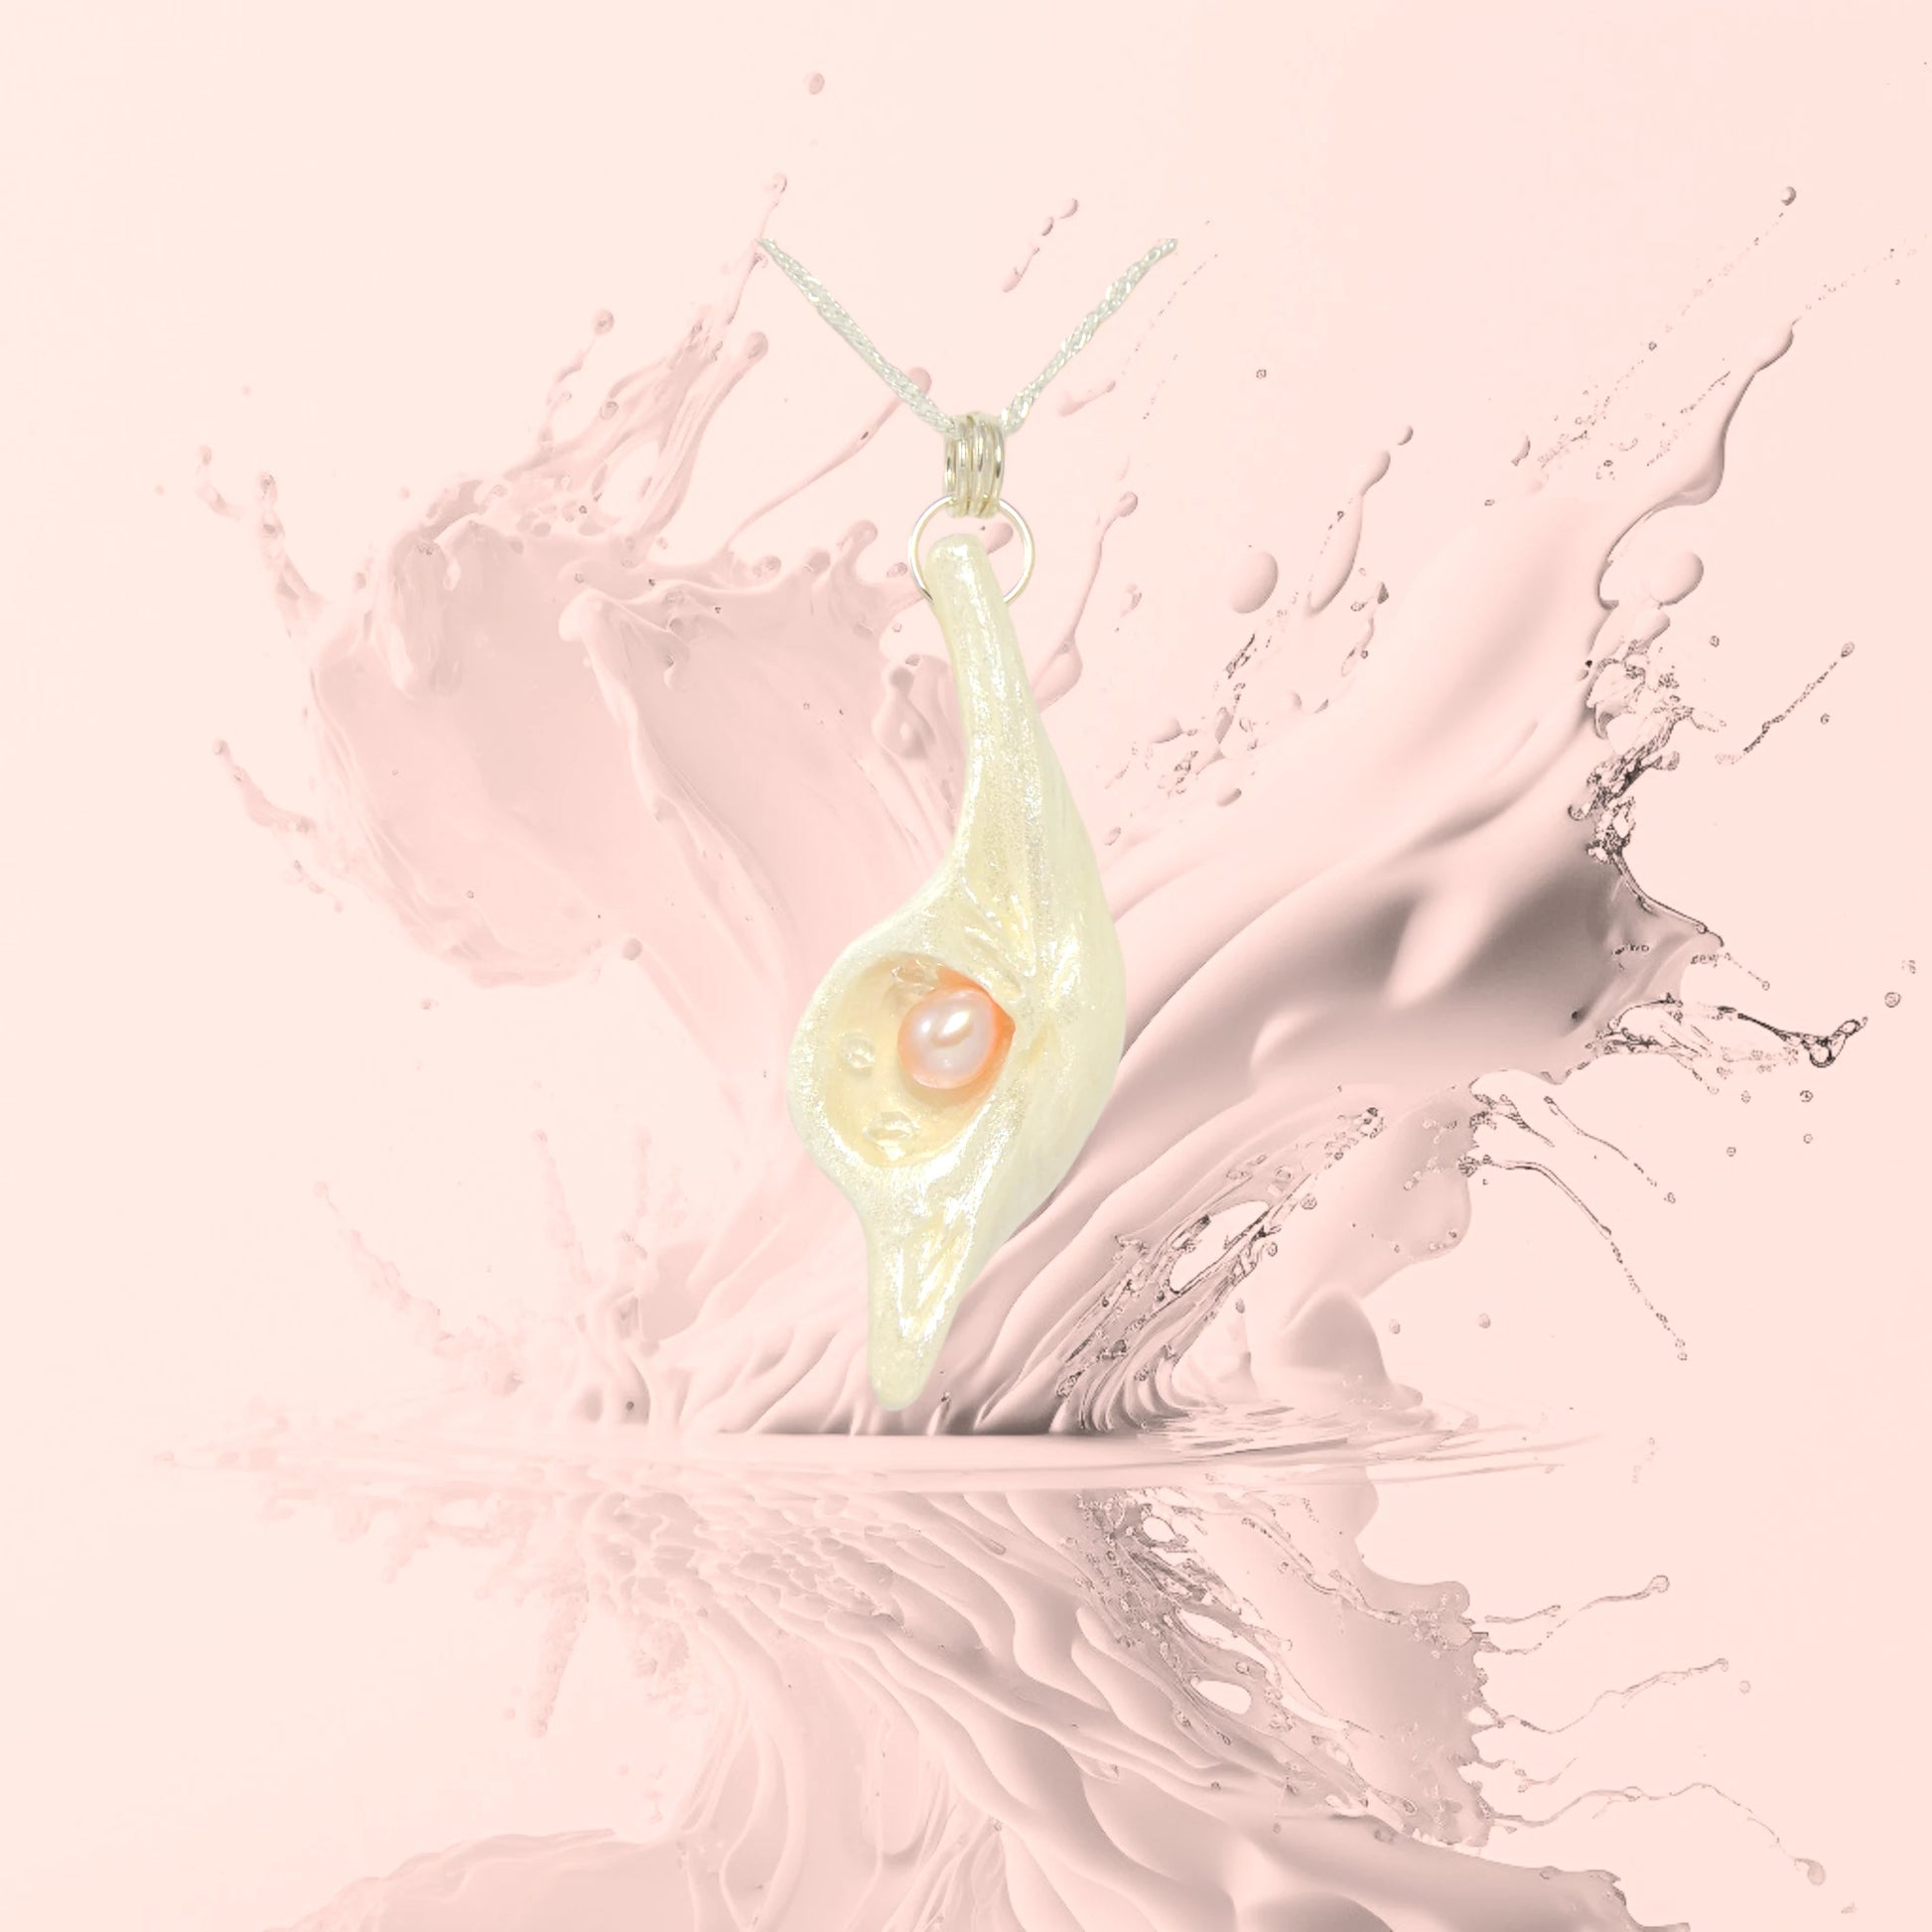 Champagne on Ice is the name of the one of kind pendant by Van Isle Goddess dot com.  The pendant is shown with a soft pink background.